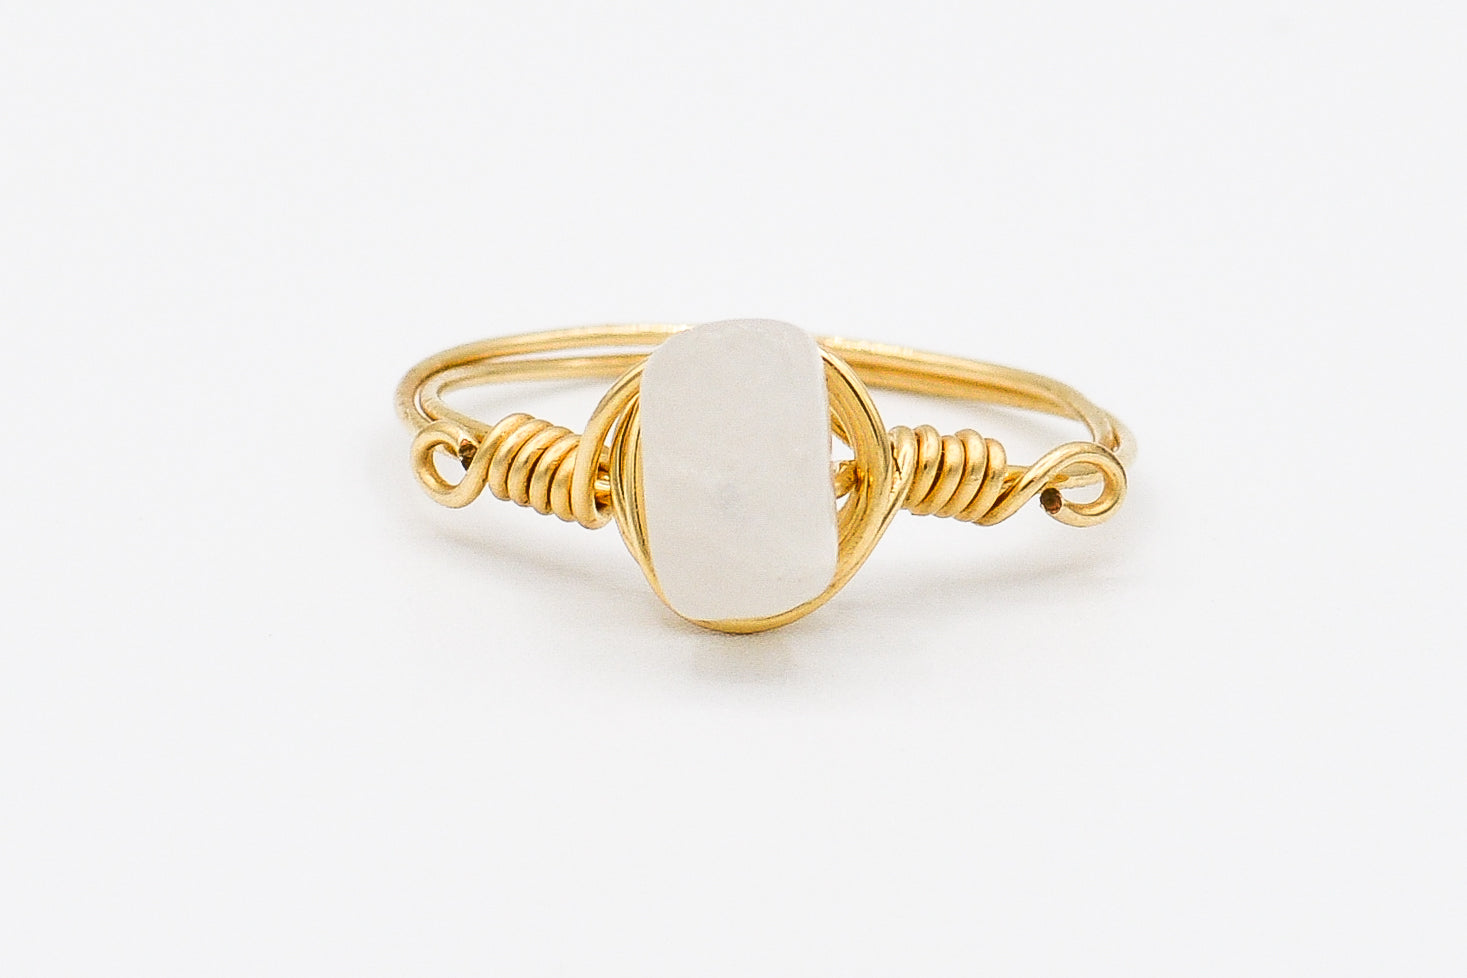 Picture of the Shiva ring, a Nelumbo jewelry piece, handmade from 14k solid gold and milky quartz